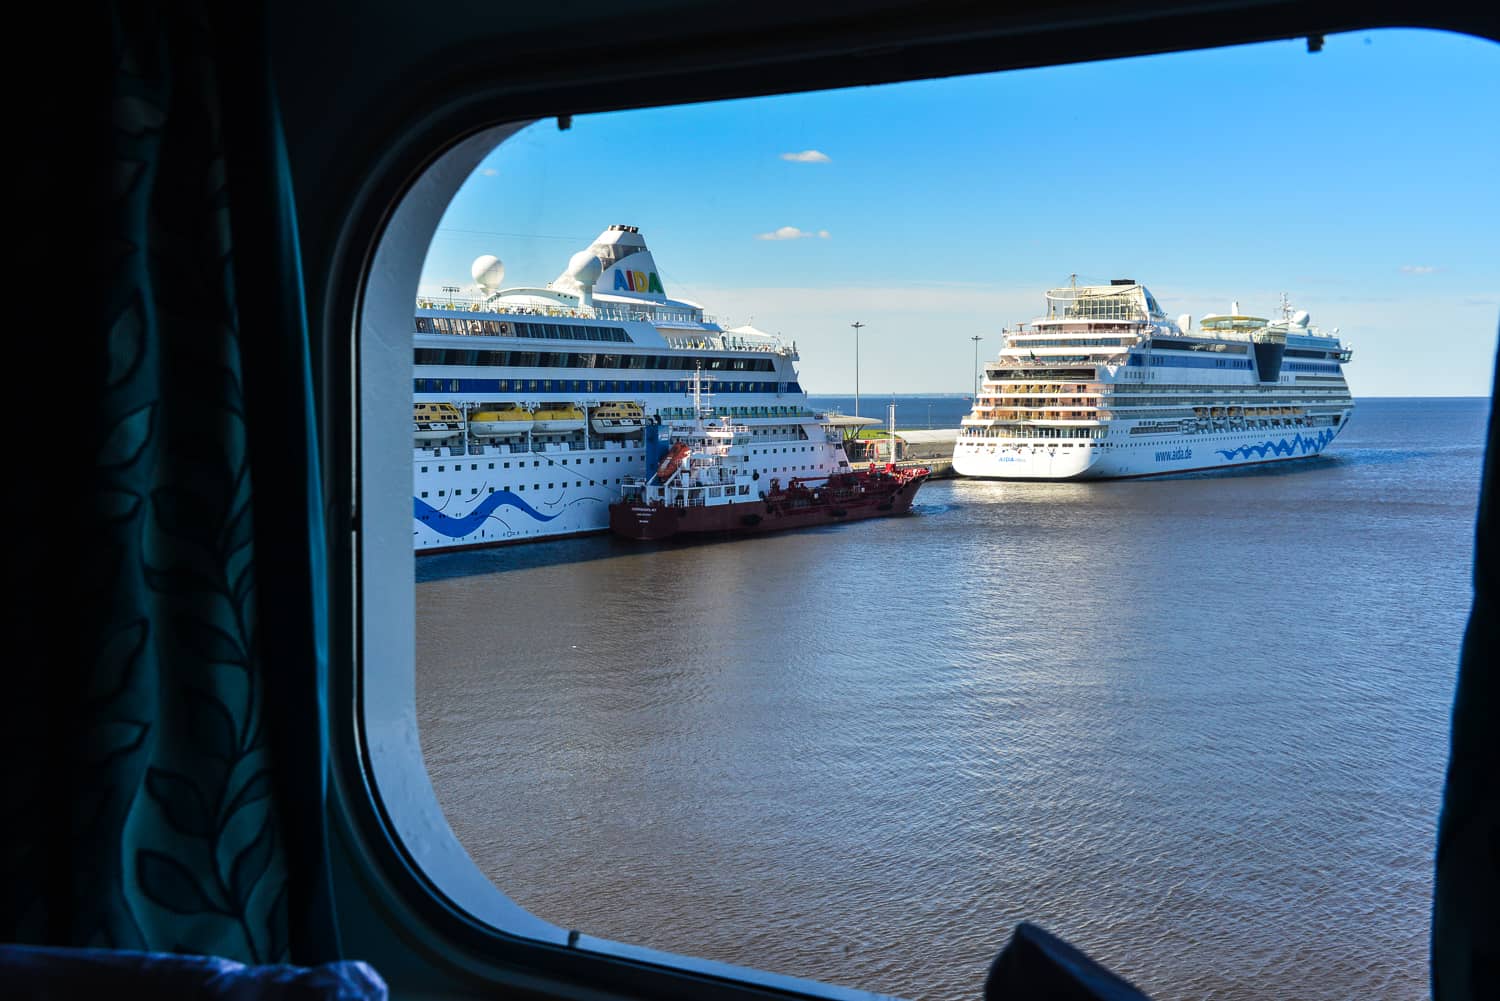 Back on the ship we can see the competition through our cabin window.